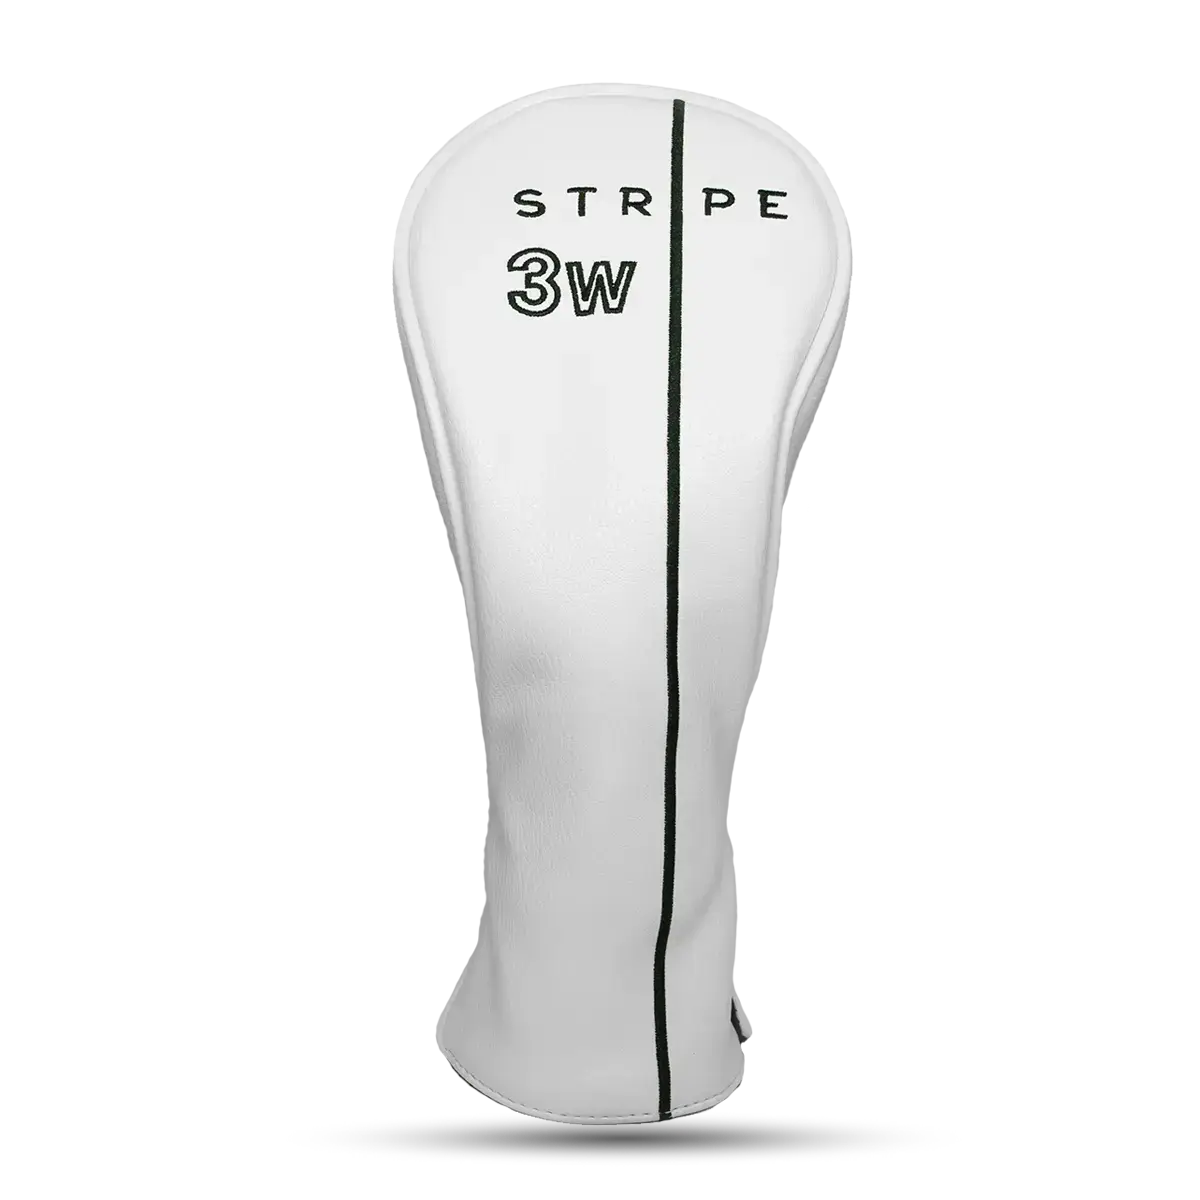 Headcover for fairway woods in white leather with green embroidery details - Stripe golf